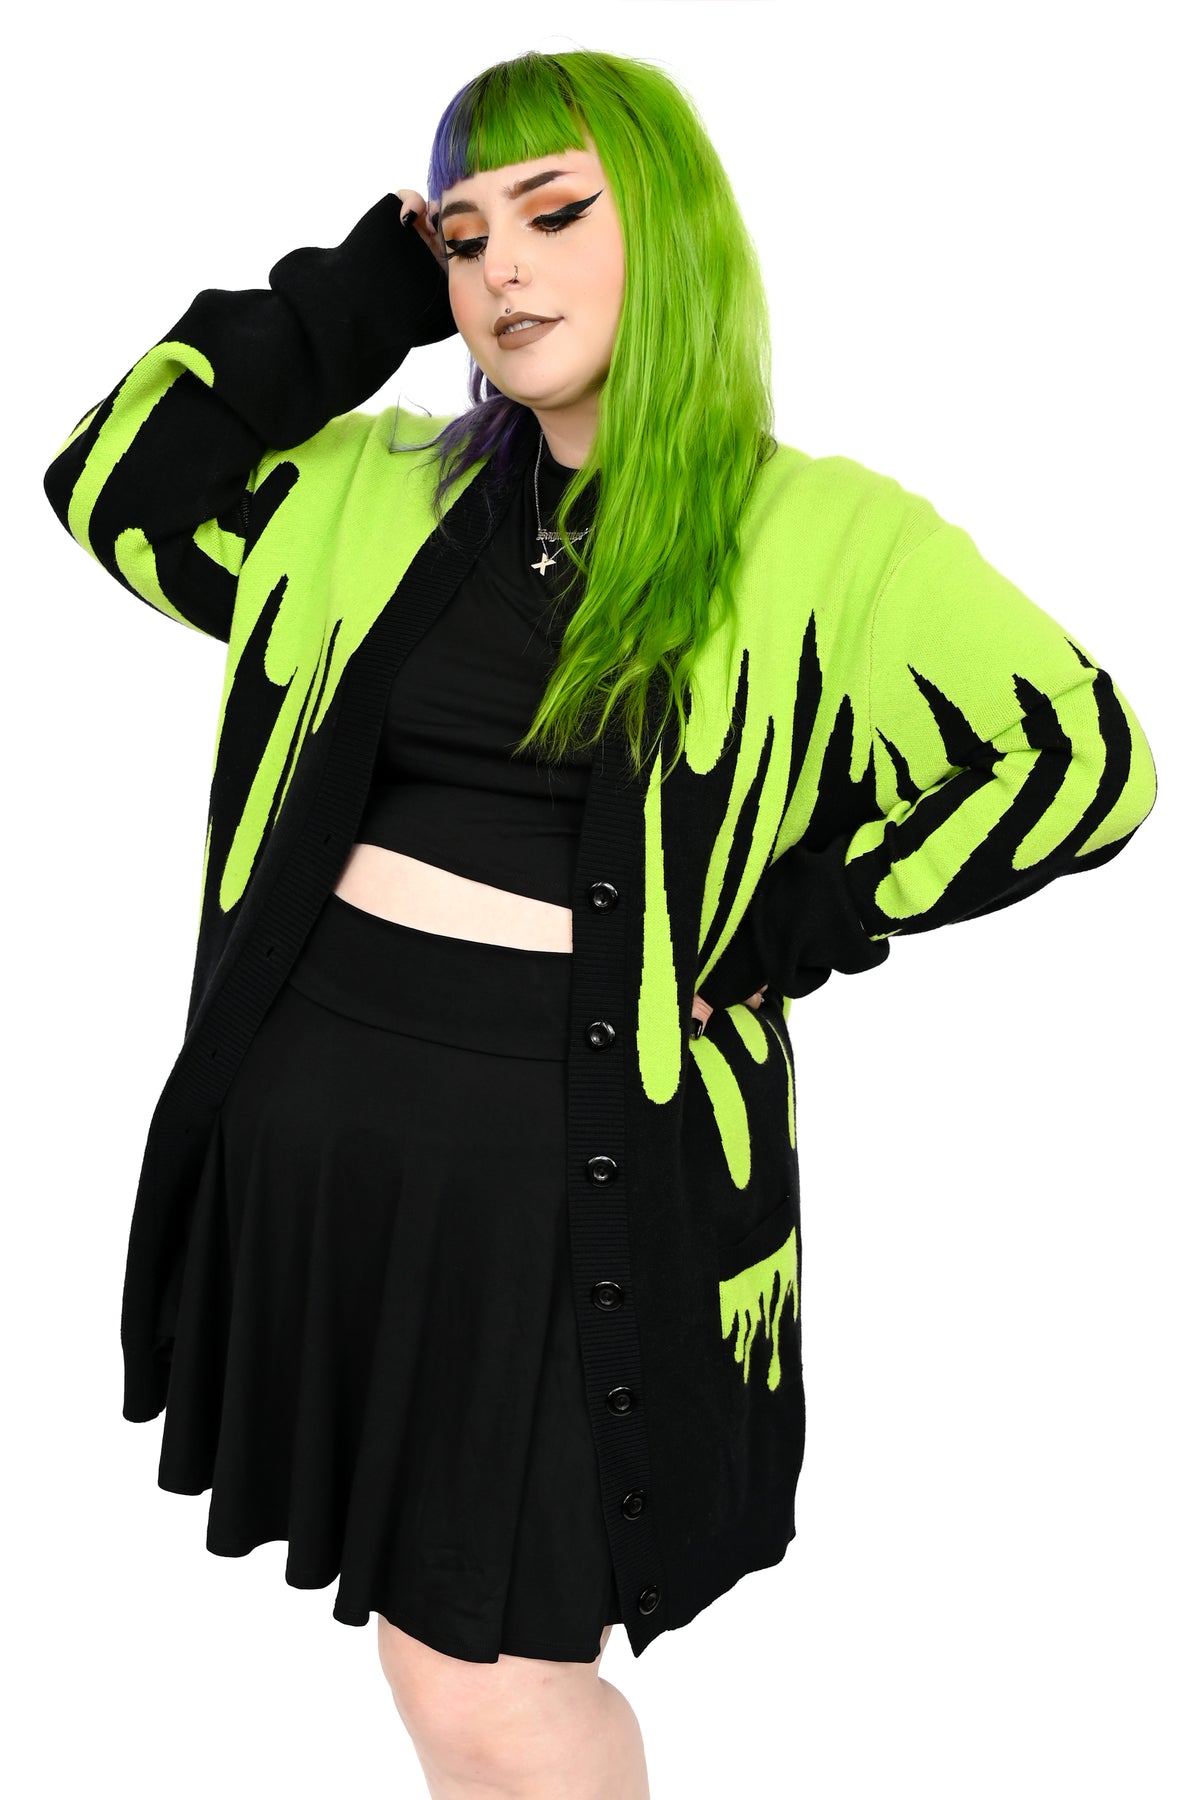 Black cardigan with the perfect slime green drips all over.